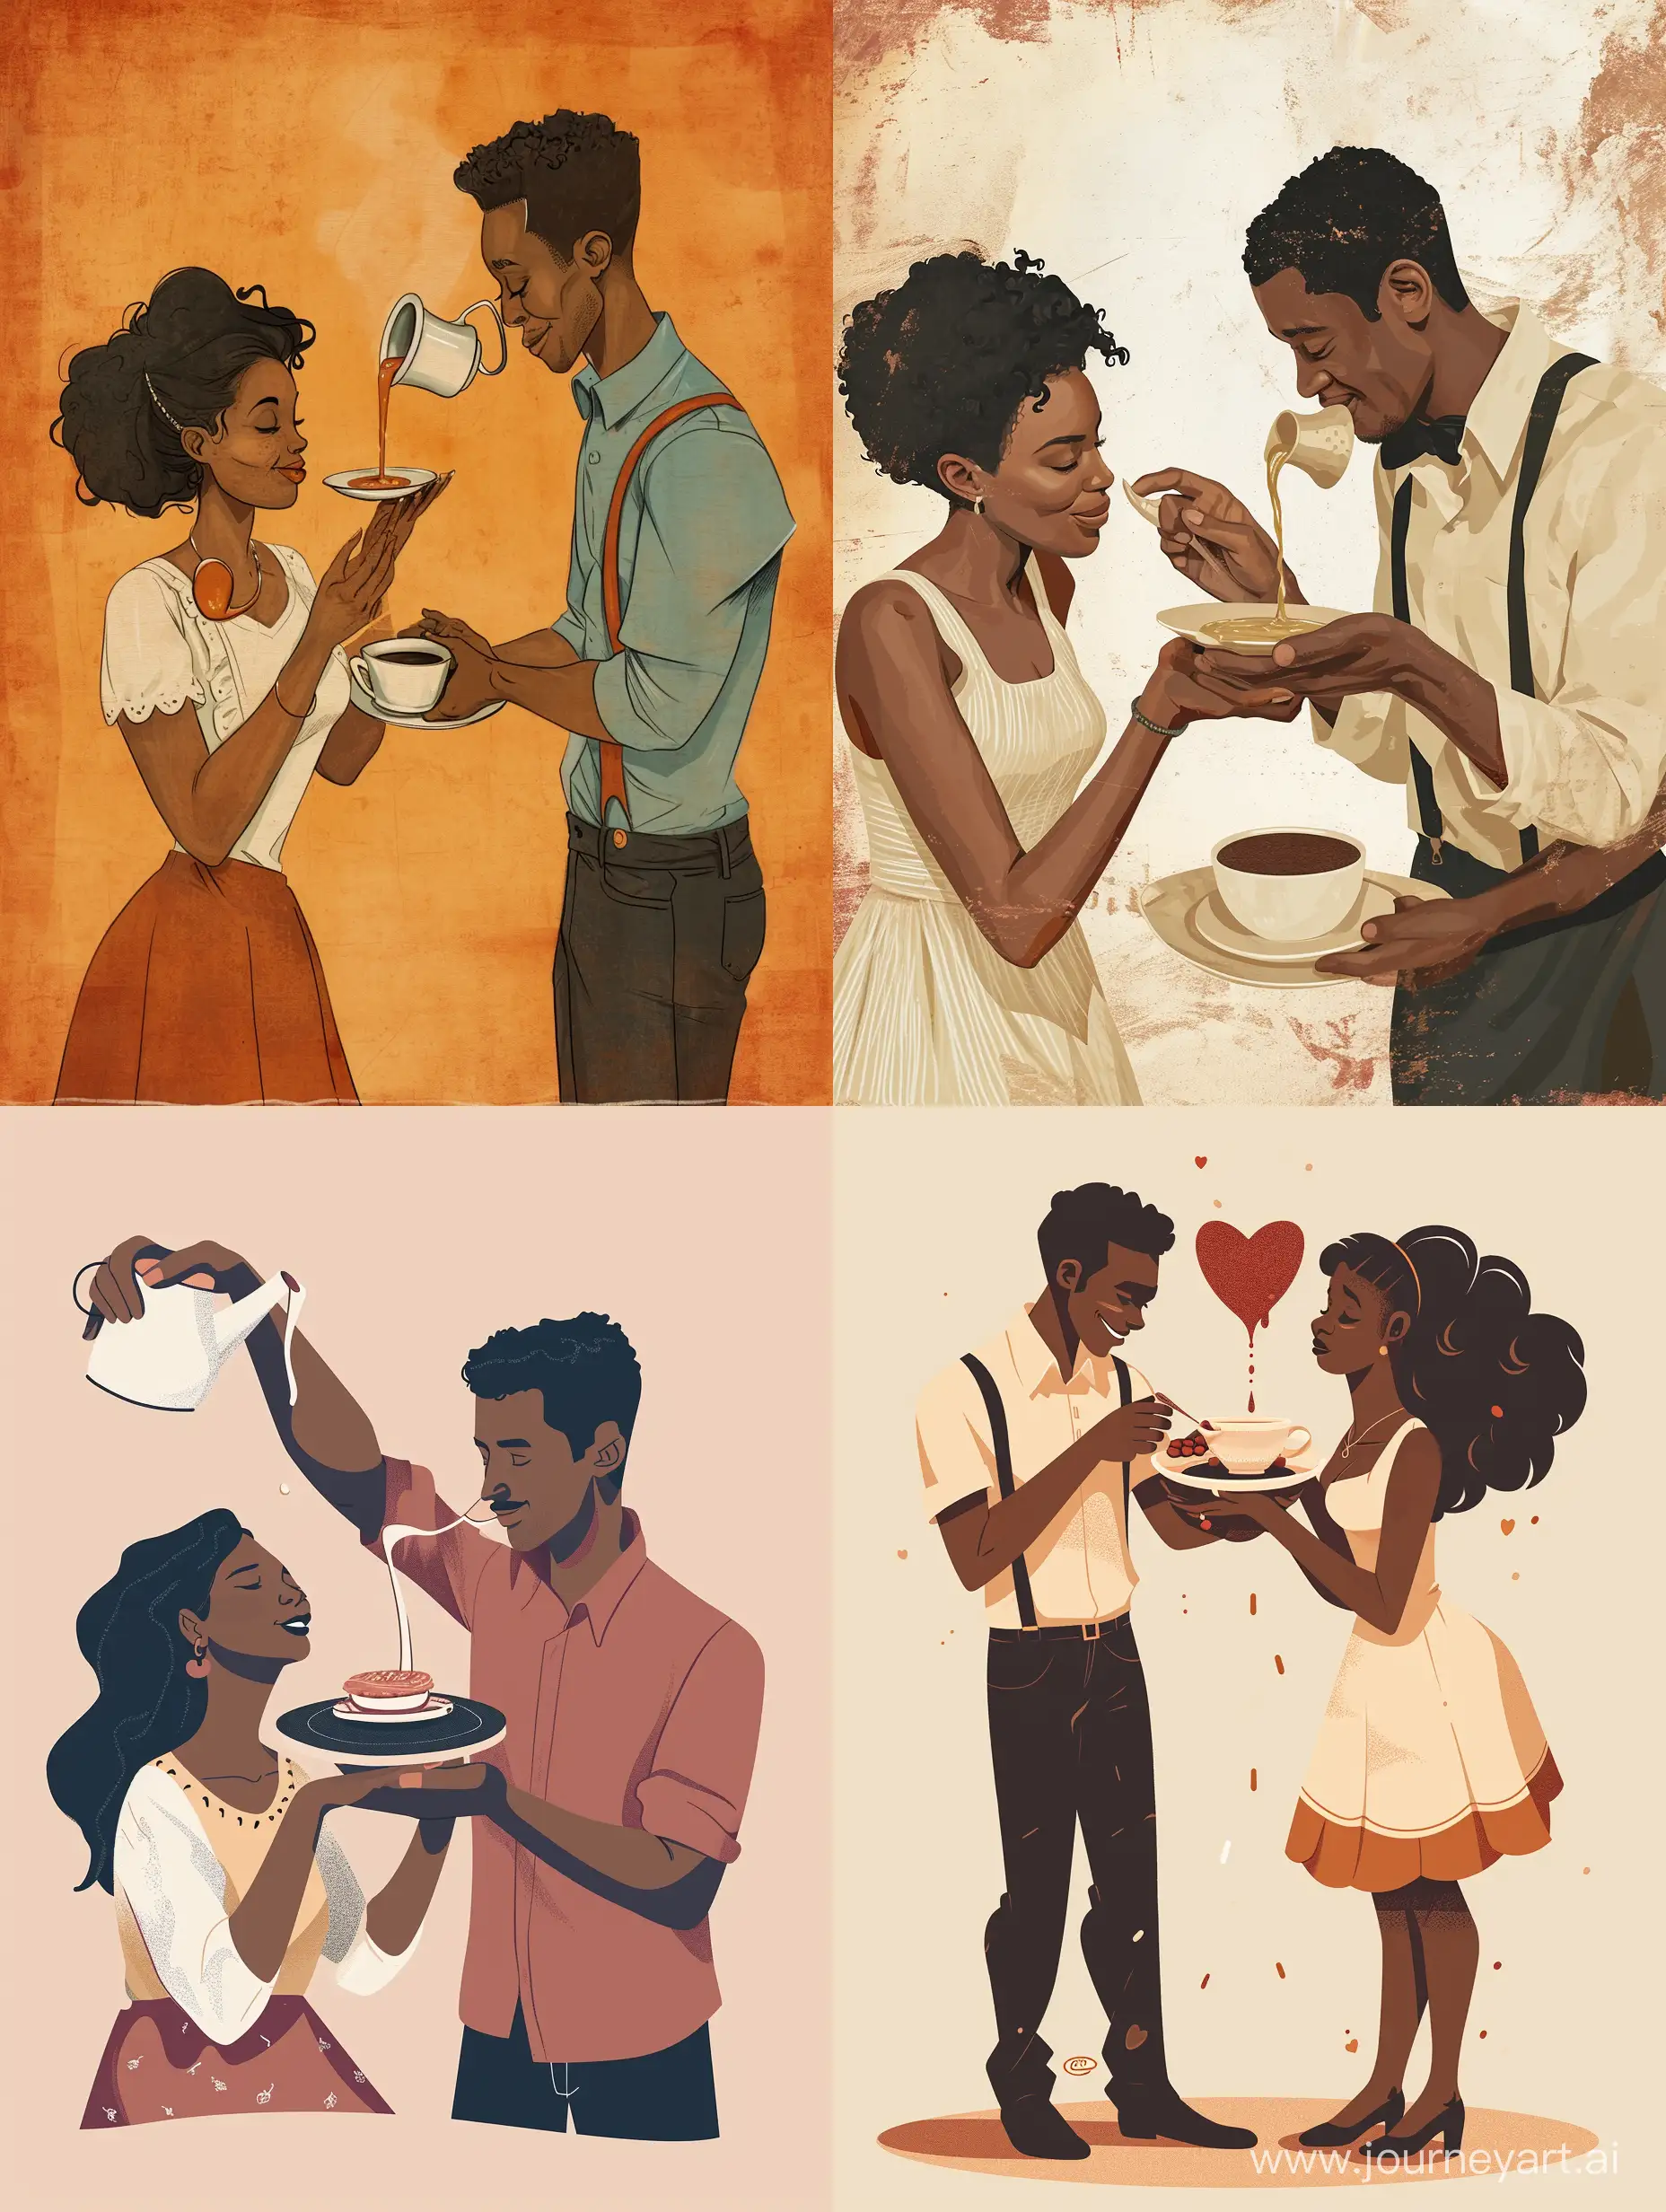 A black couple man and woman. The woman is feeding the man from a plate of love as he pours from a cup of love onto her